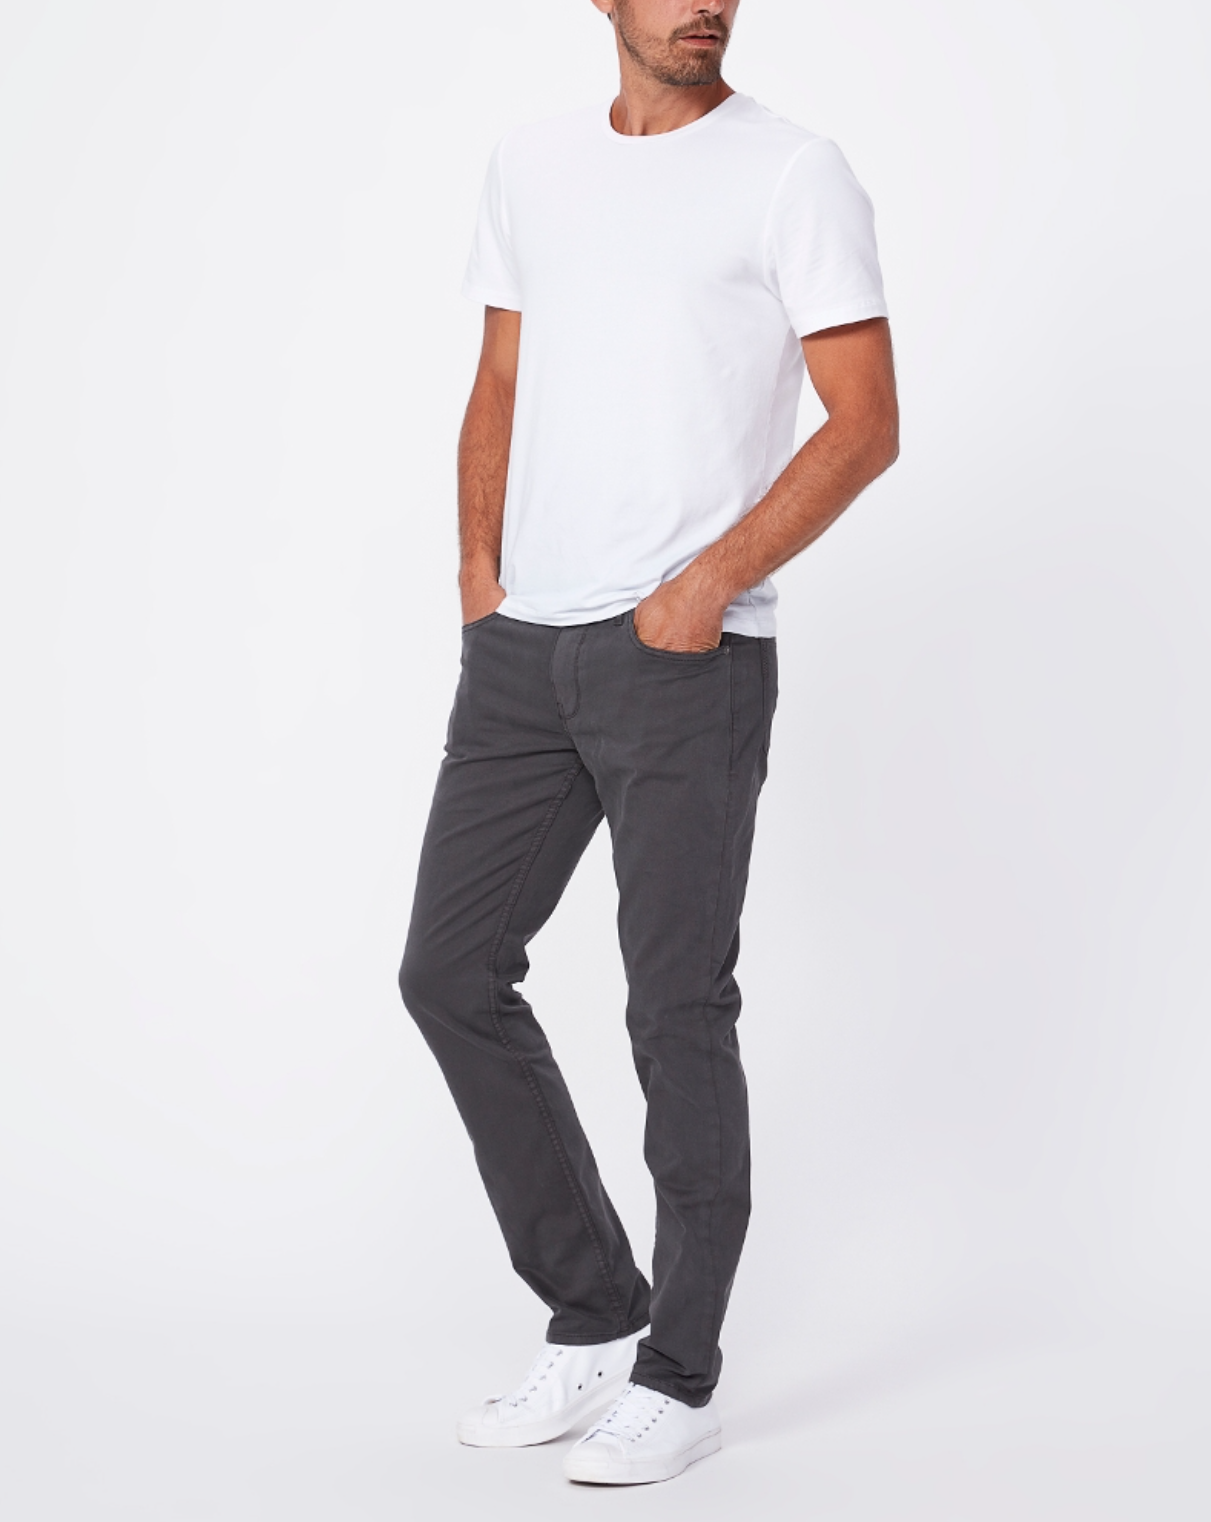 full body view of the lennox skinny fit twill pant from paige, in grey, styled with a white t-shirt